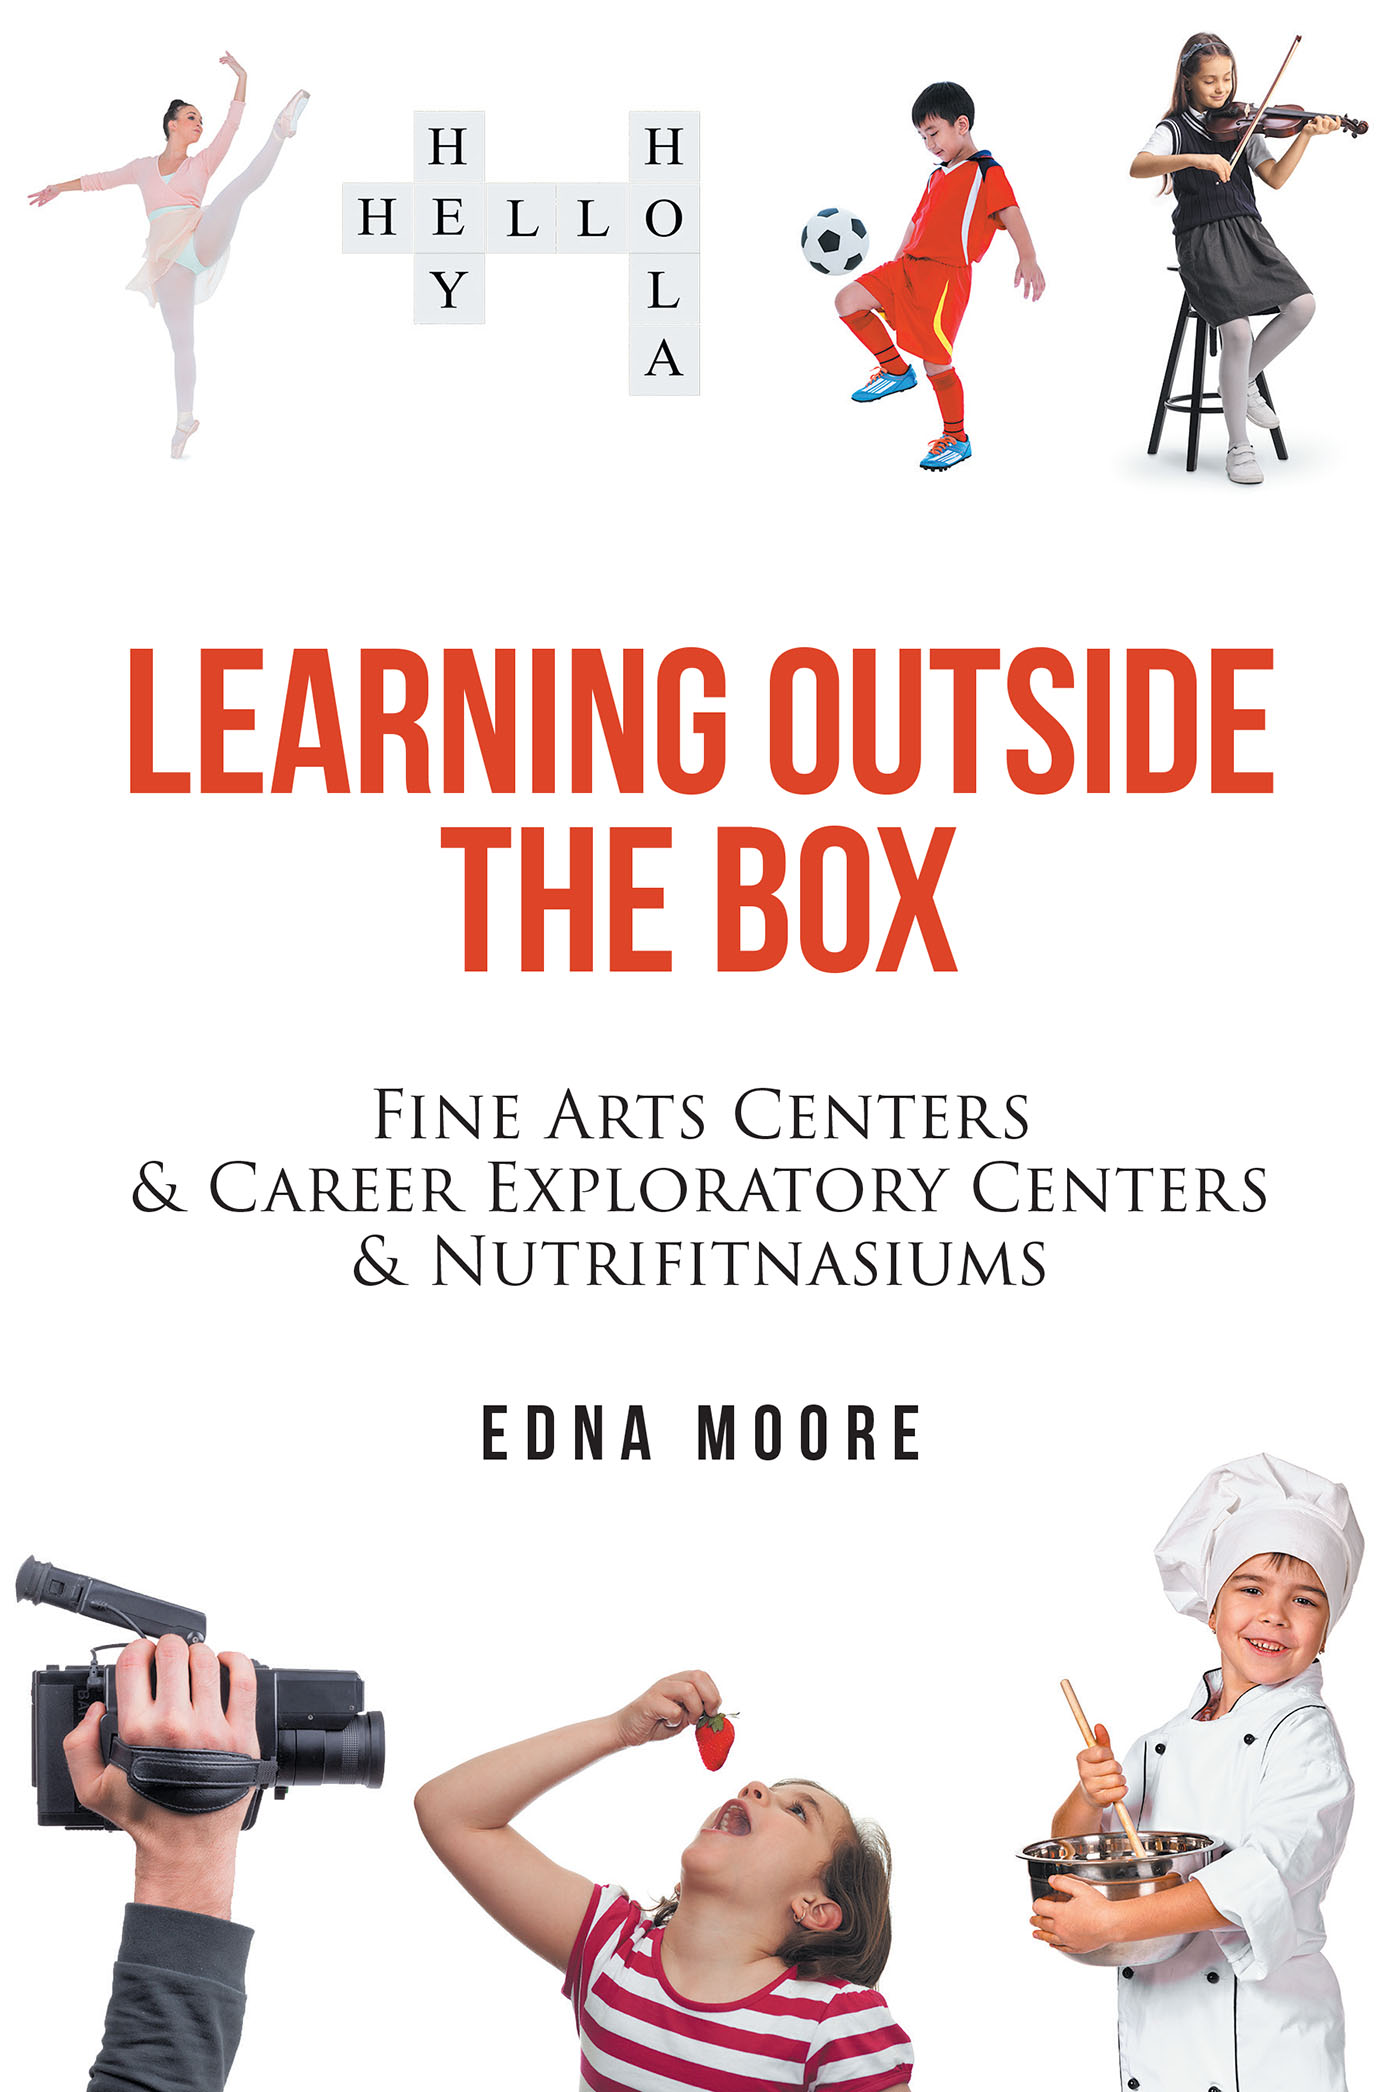 Edna Moore’s New Book, "Learning Outside the Box," Explores How Learning-Outside-the-Box Centers Can Make a Difference in the Lives of Students from All Backgrounds